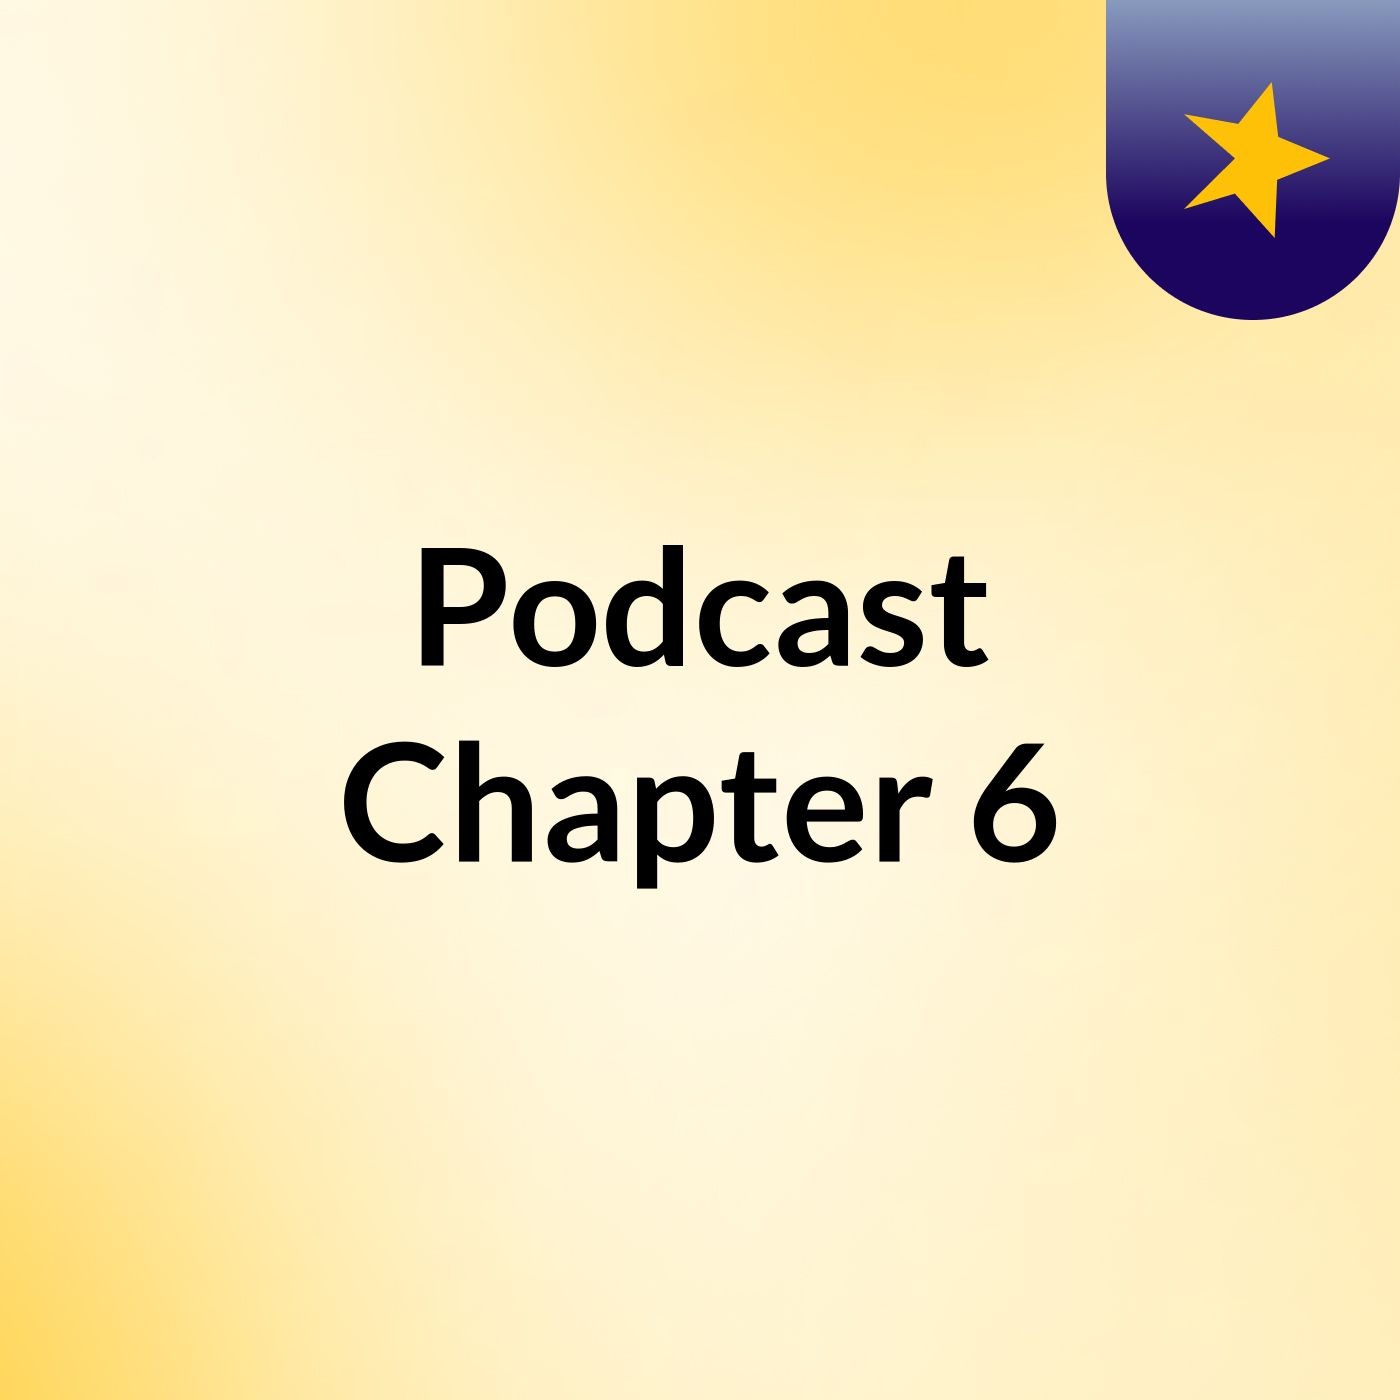 Podcast Chapter 6